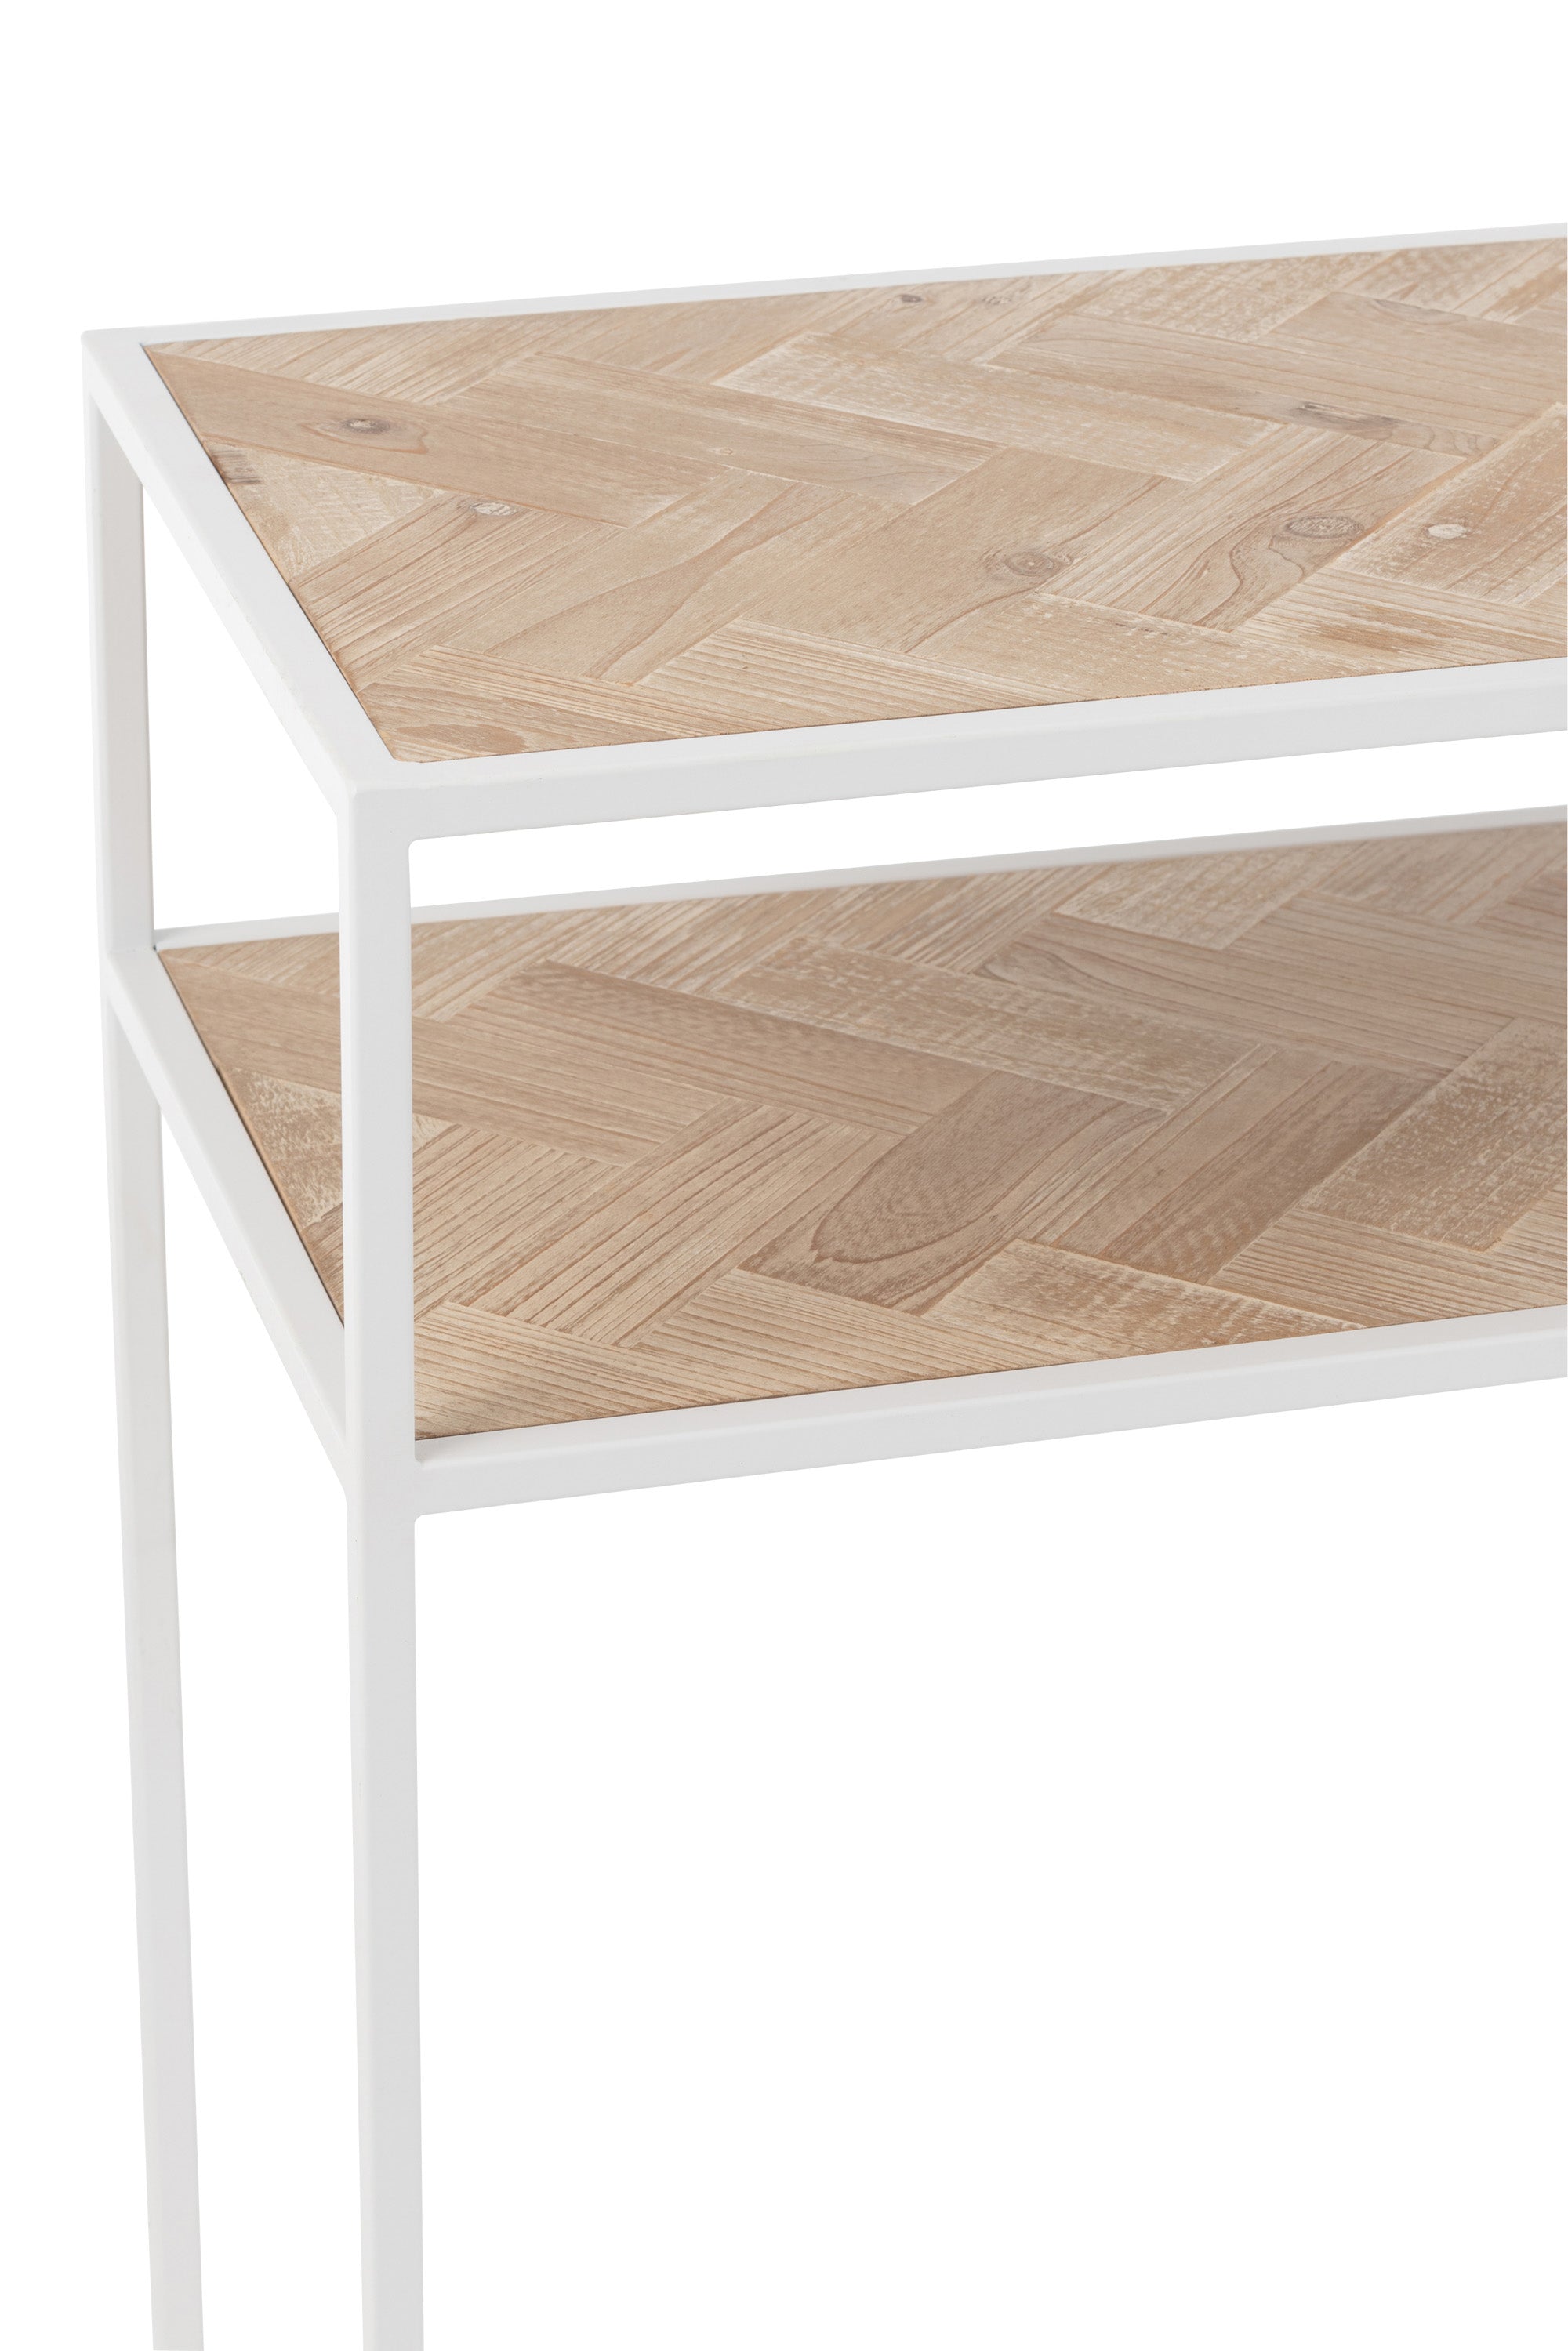 KONSOLE ZIGZAG HOLZ/METALL NATUR/WEISS